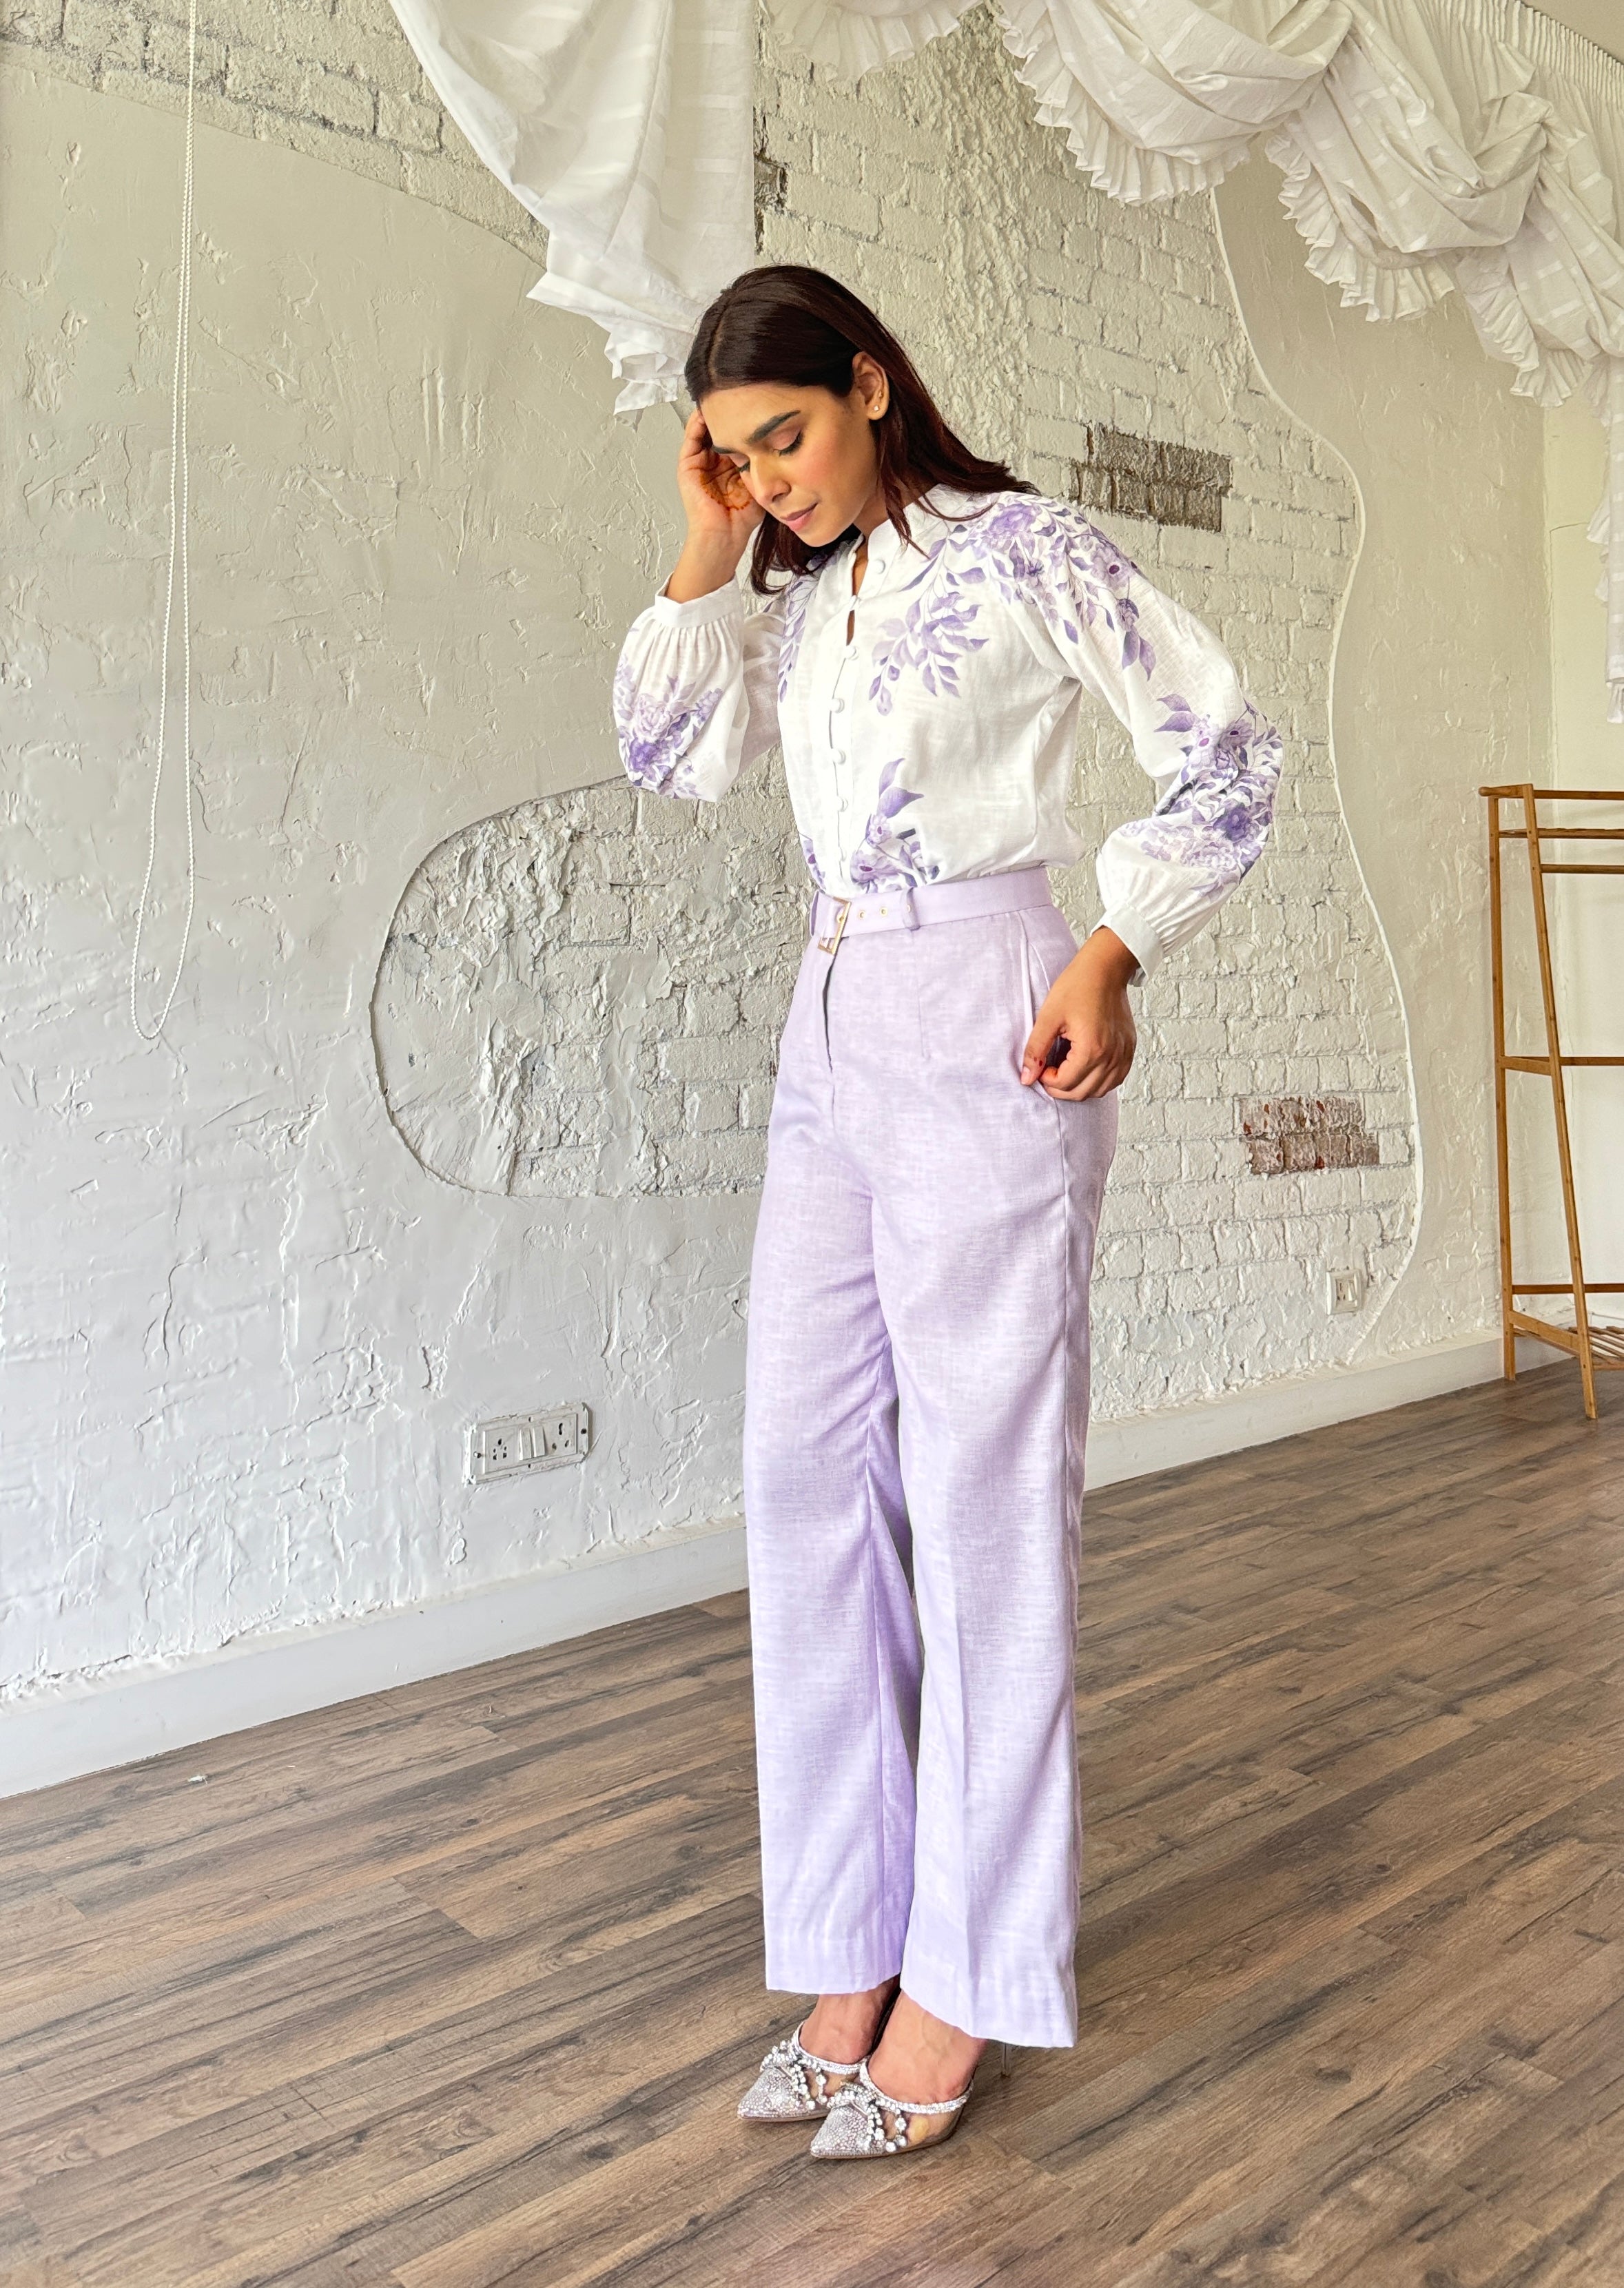 Not So Basic Lavender Coord